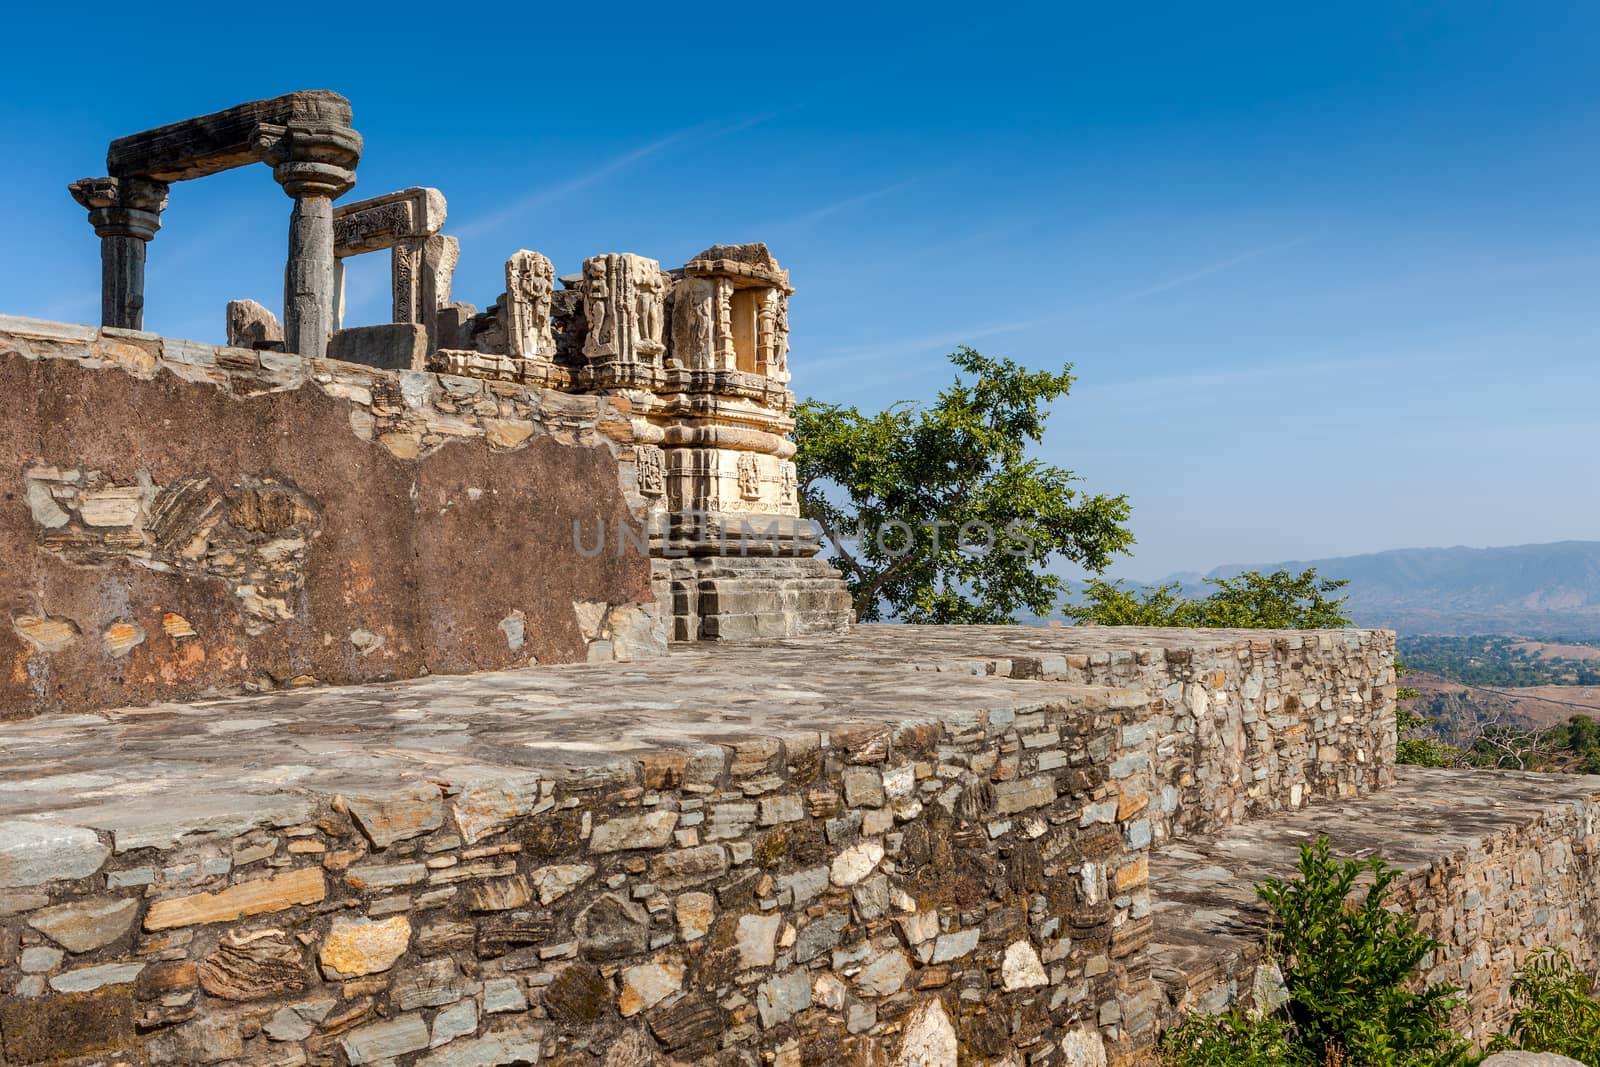 Ruined temple in the Kumbhalgarh fort complex, Rajasthan, India, Asia